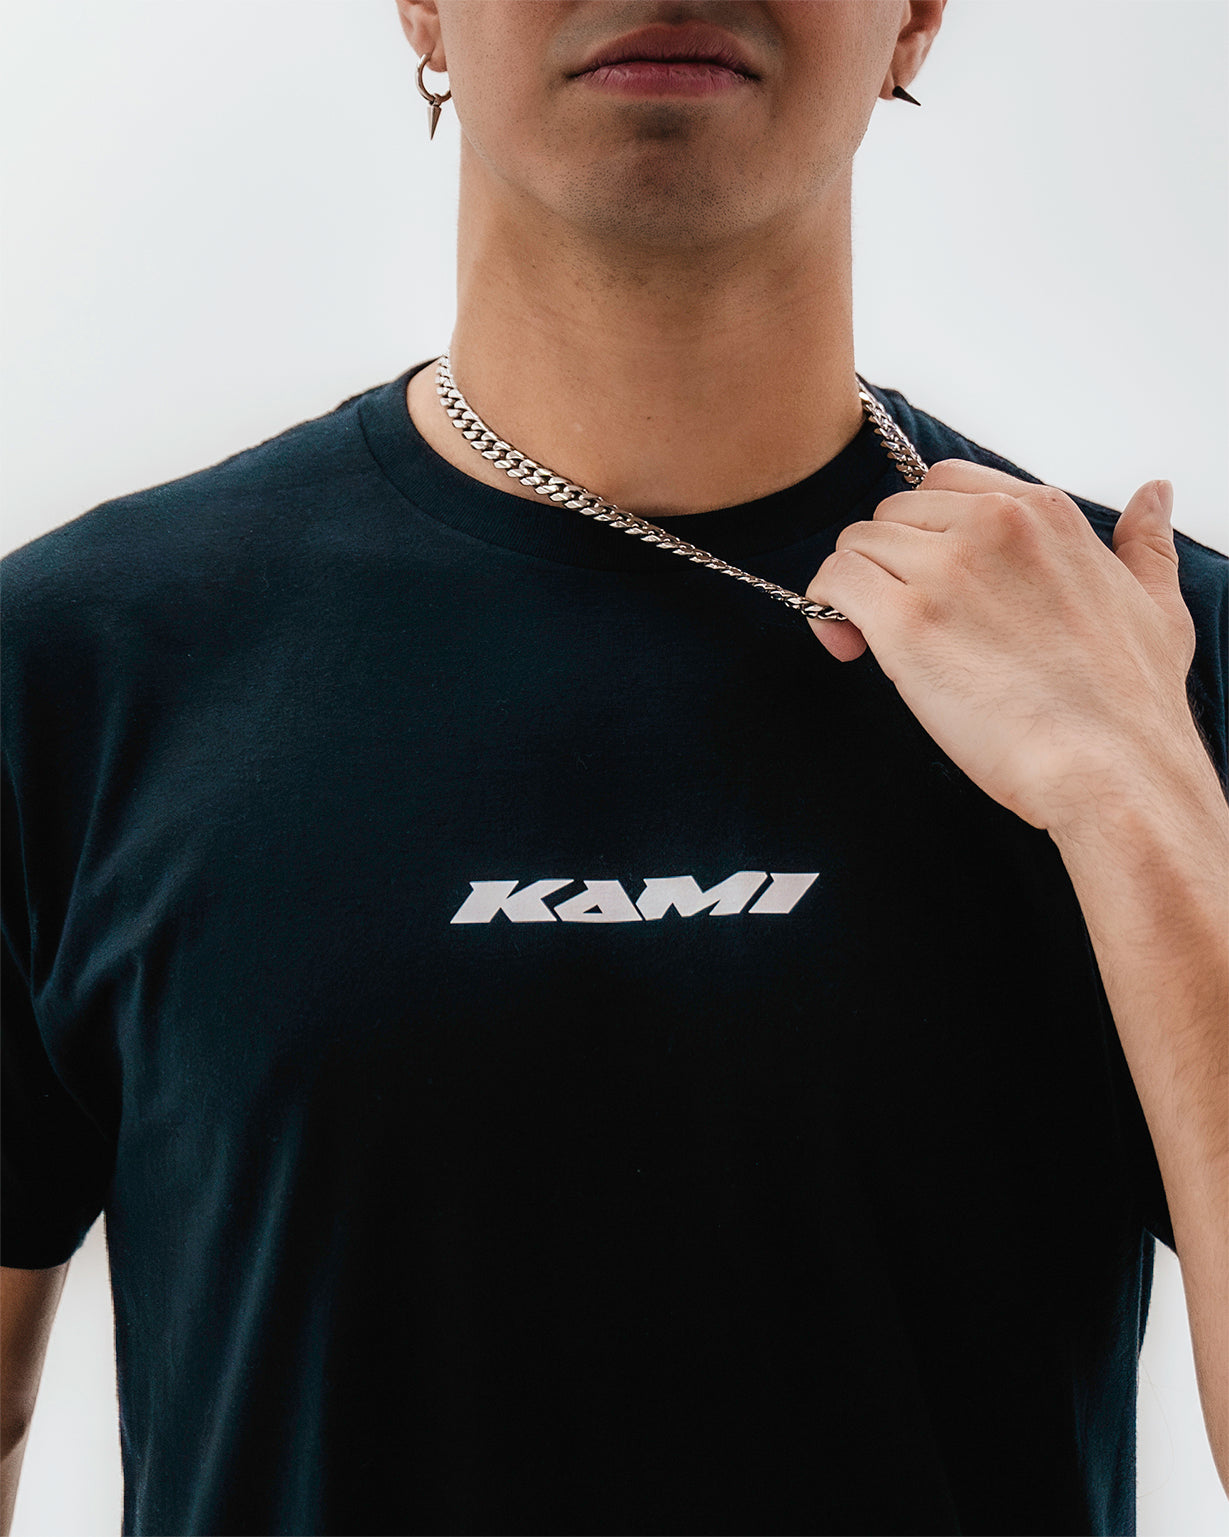 KAMI Fitted (Scan for Hard Dance) T-Shirt